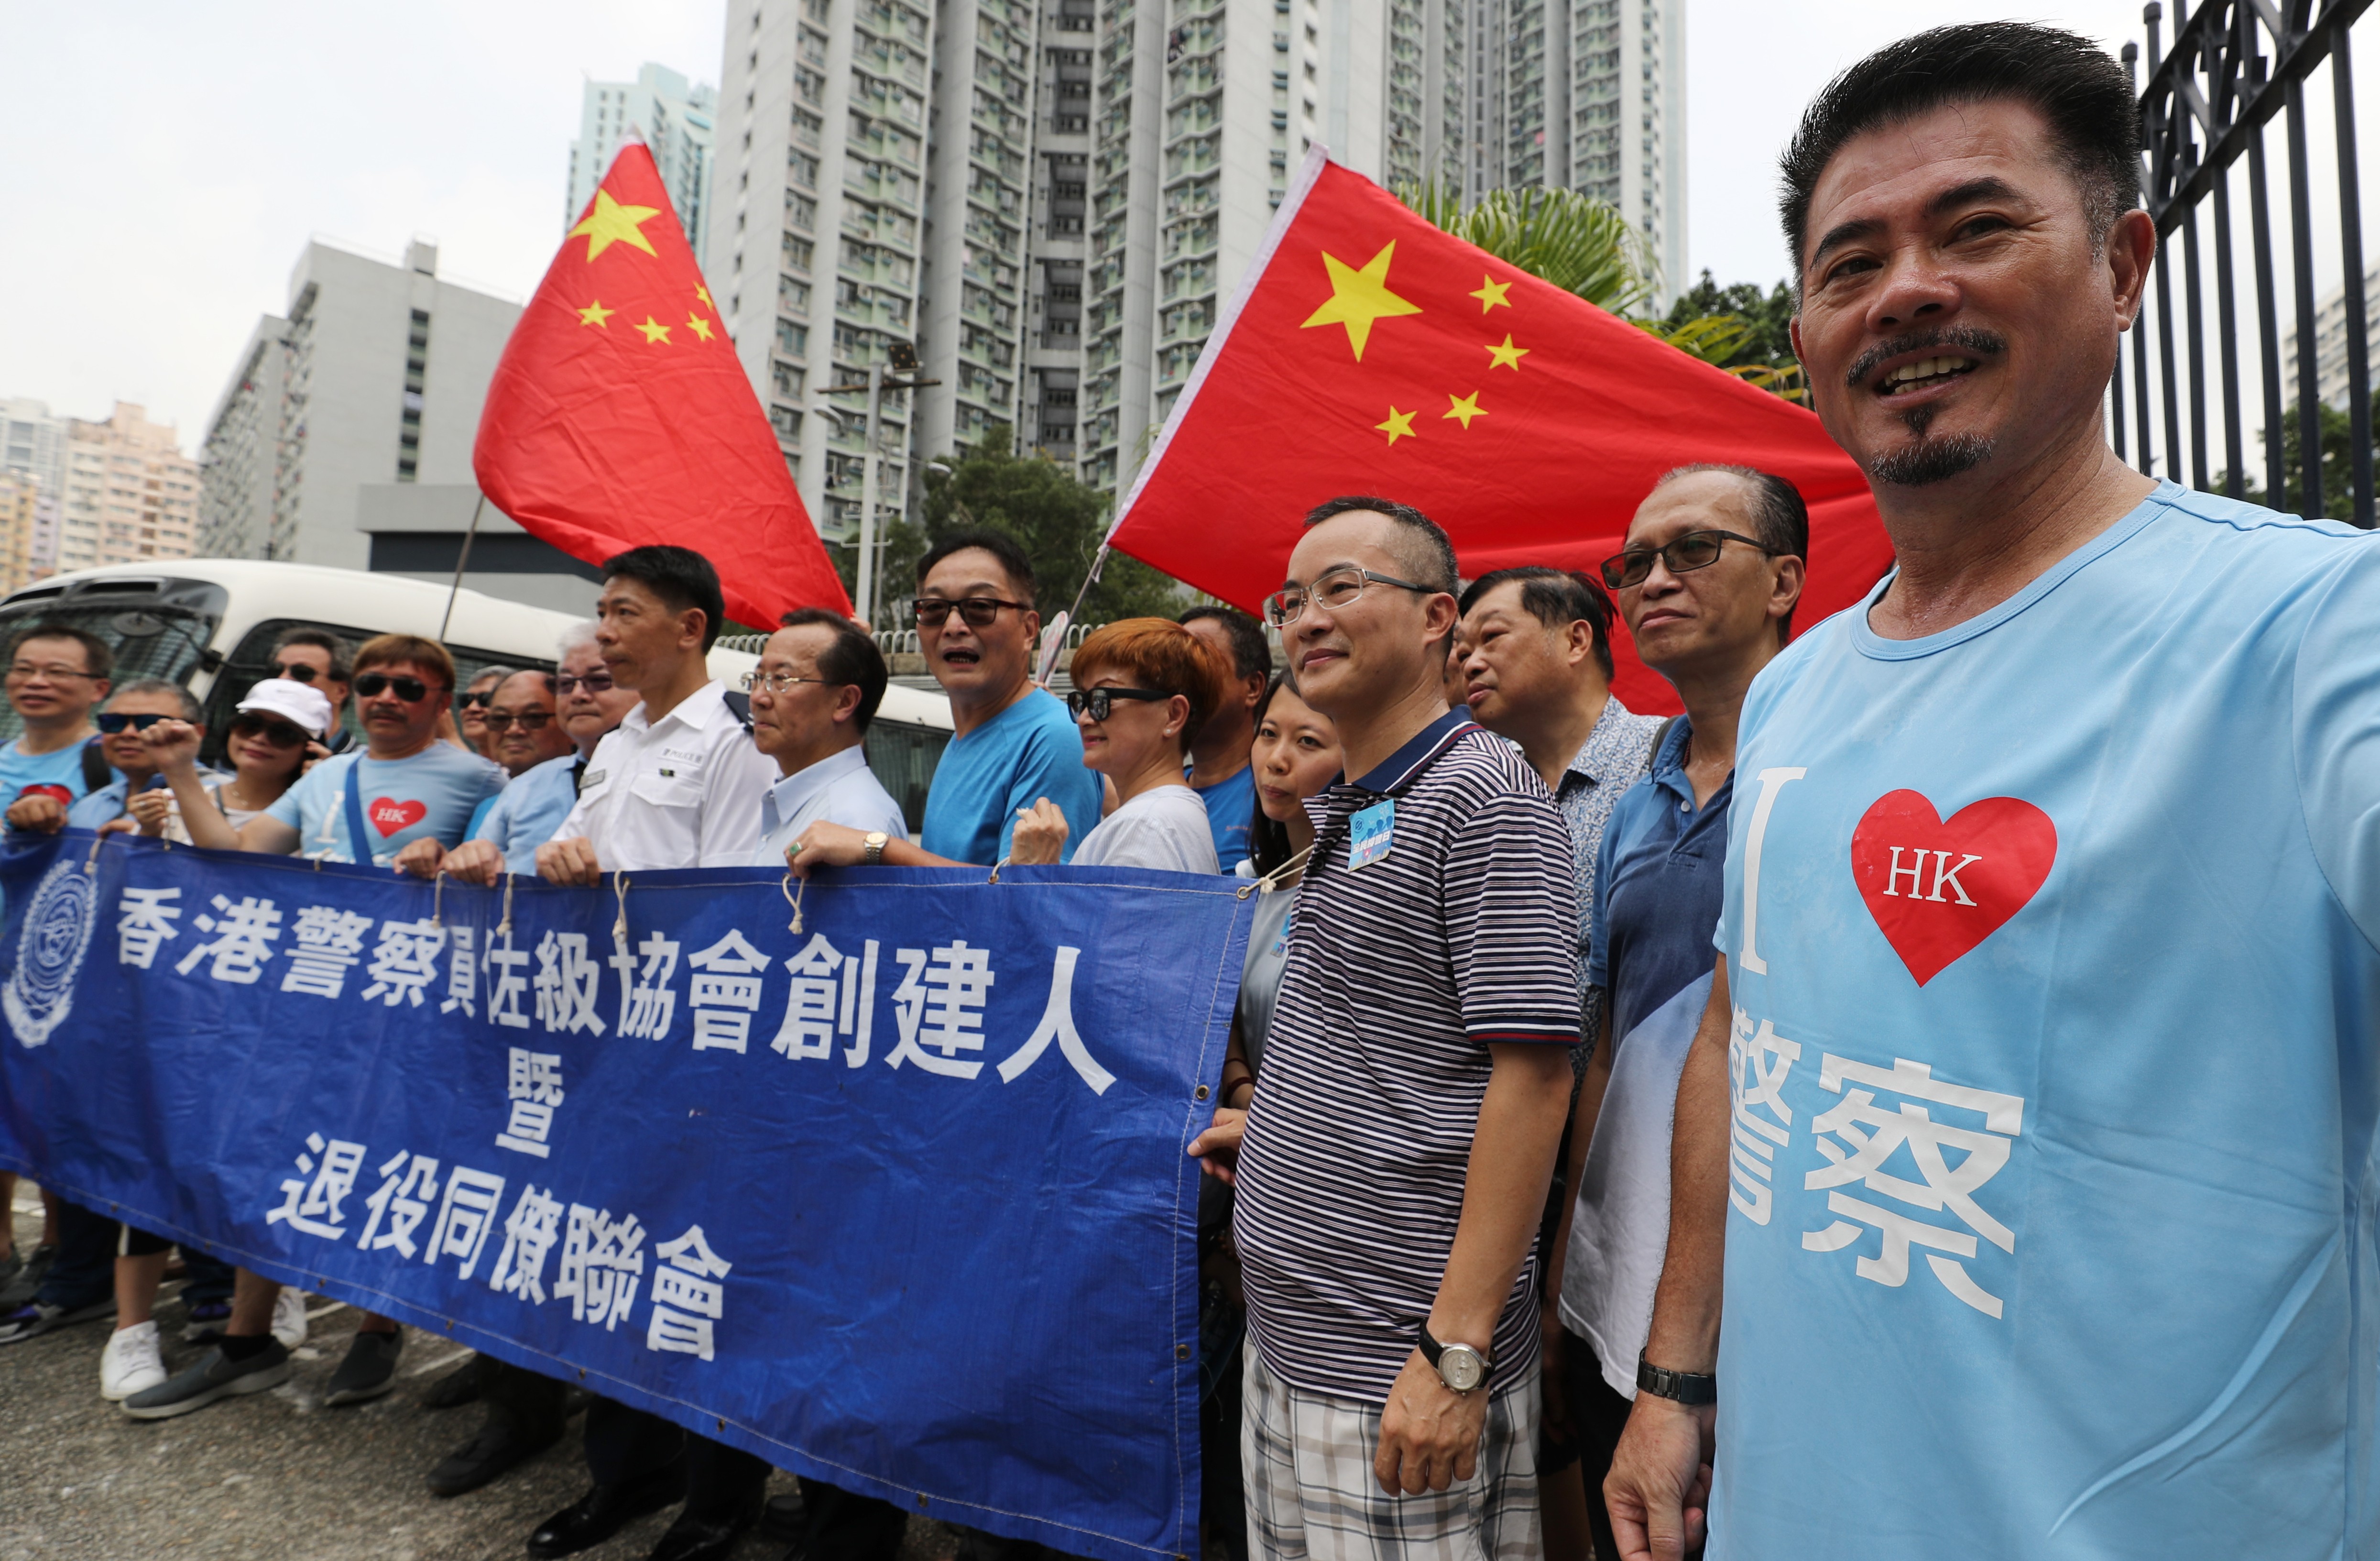 Supporters of China and the Hong Kong police carry Chinese flags at the Kwai Chung Police Station on August 10. Photo: Edward Wong